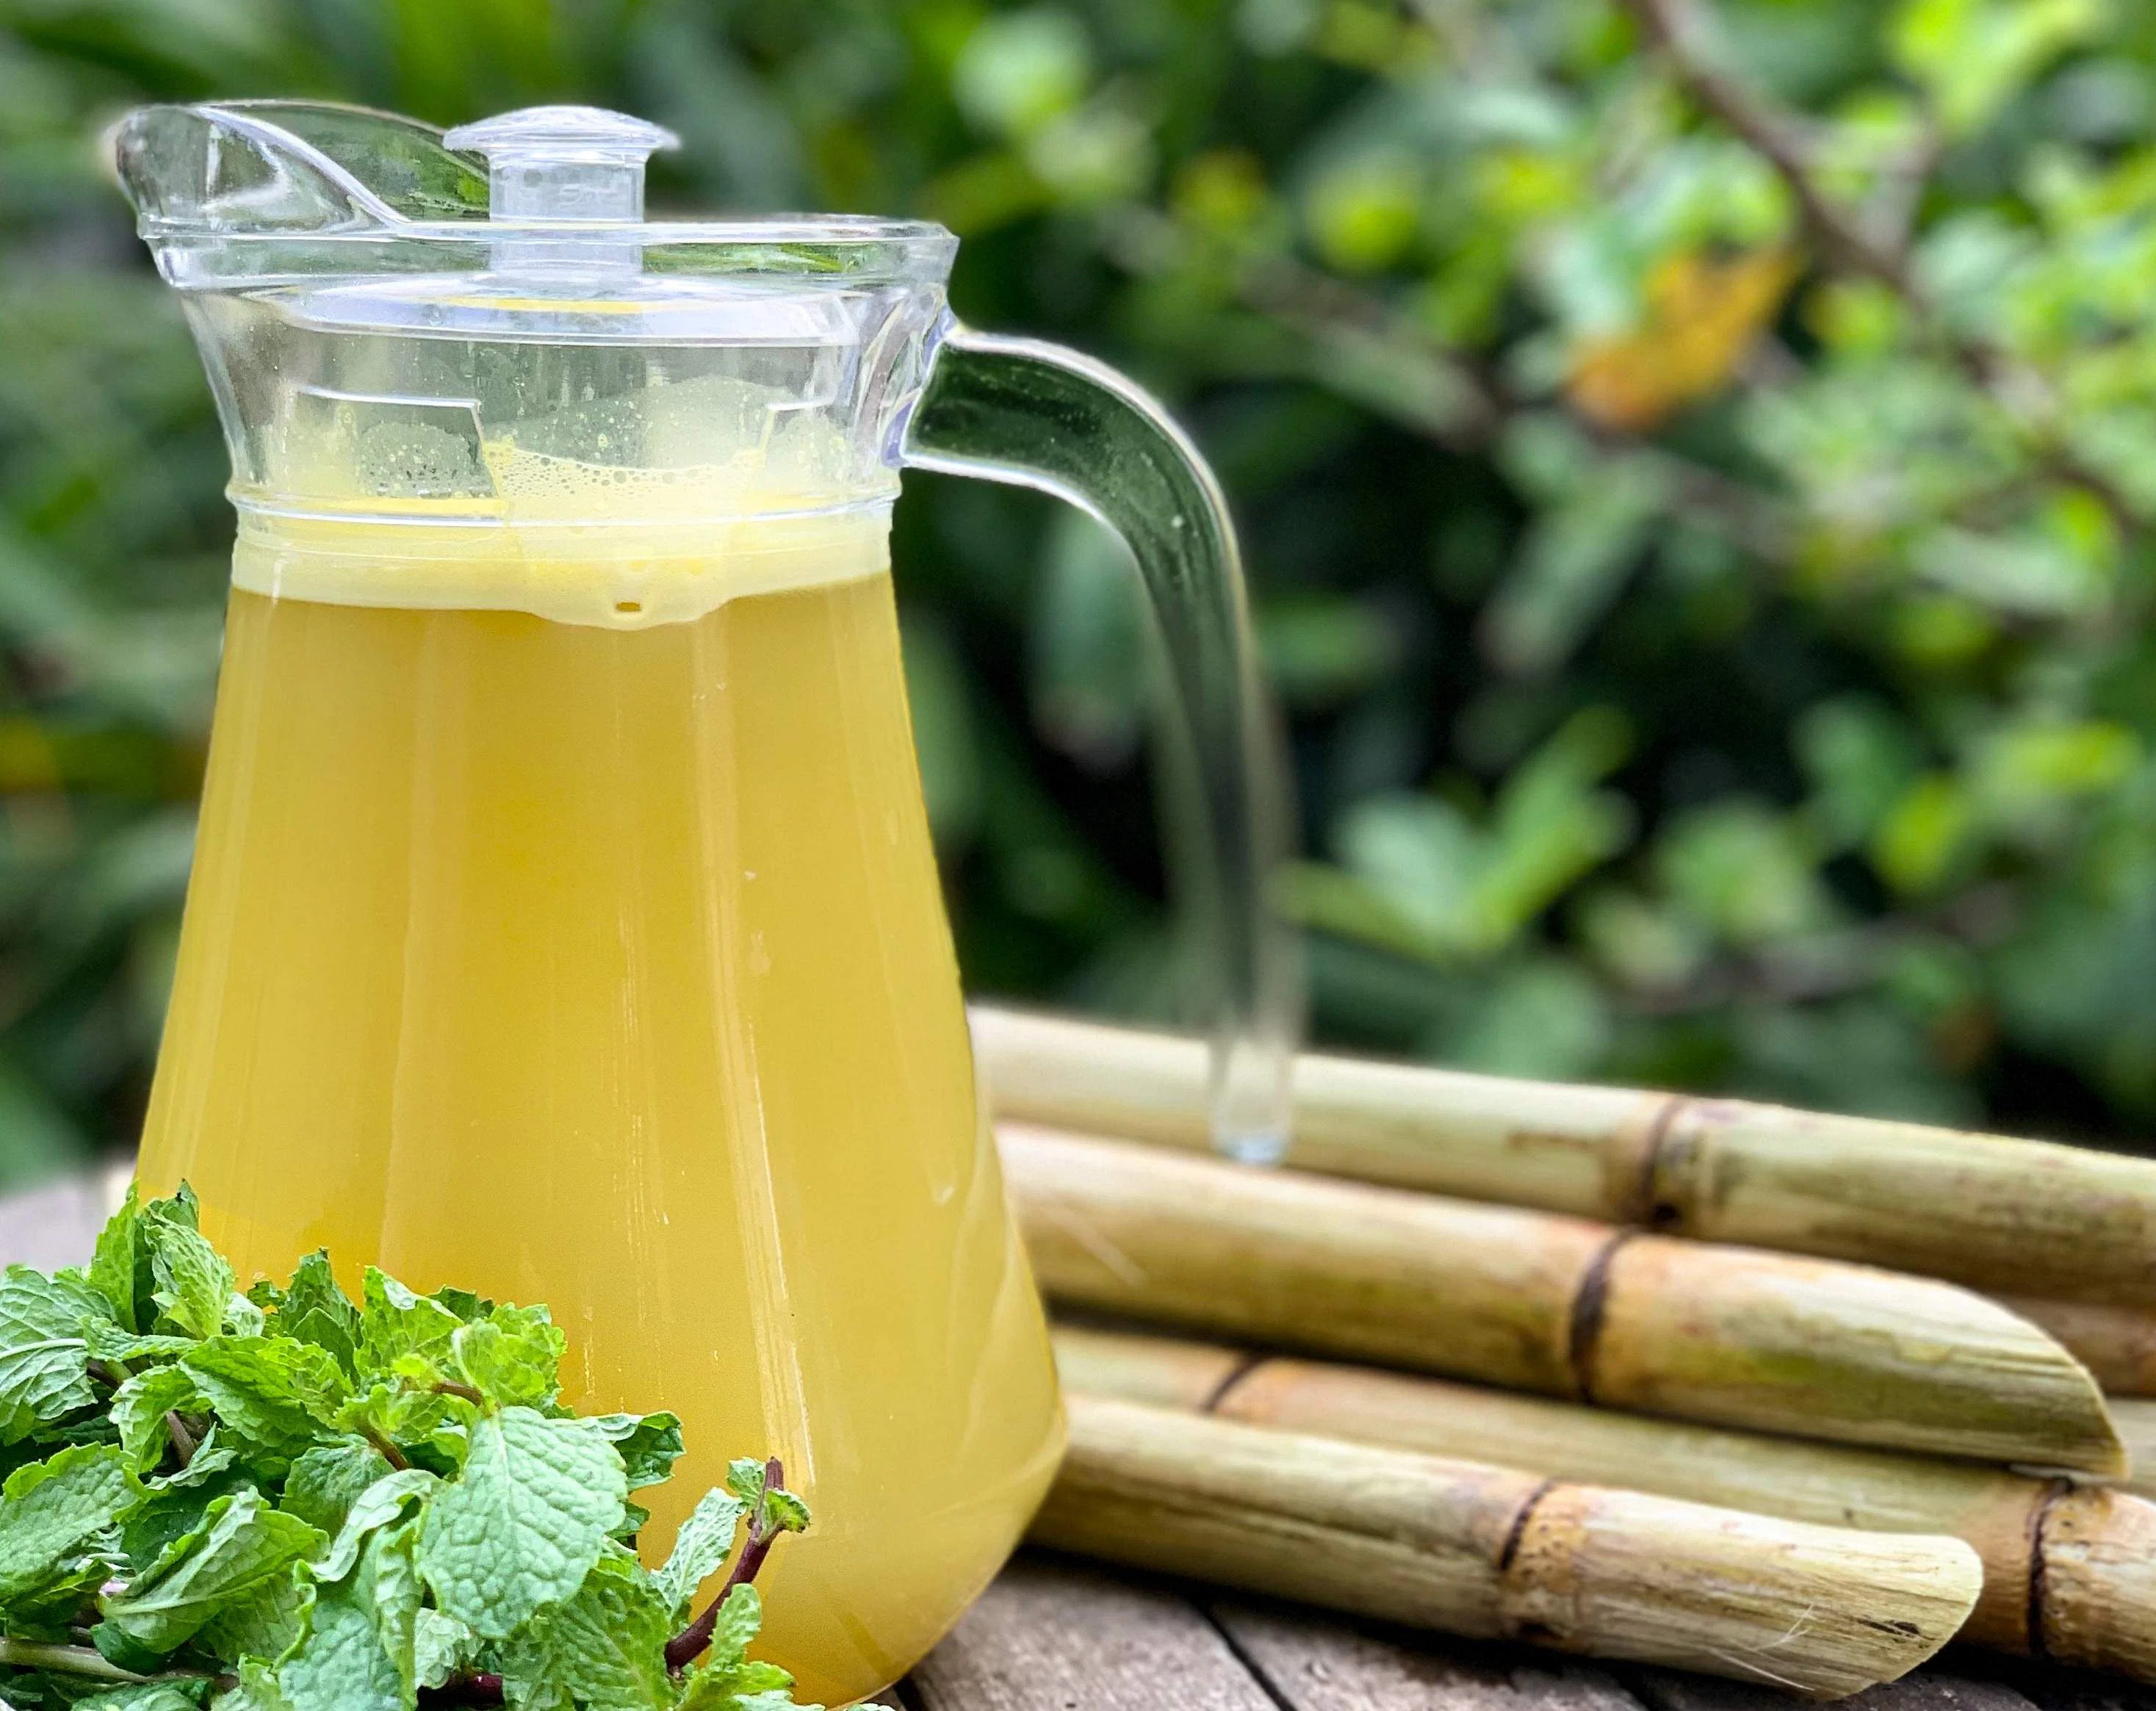 sugar cane juice can make skin glowing and healthy